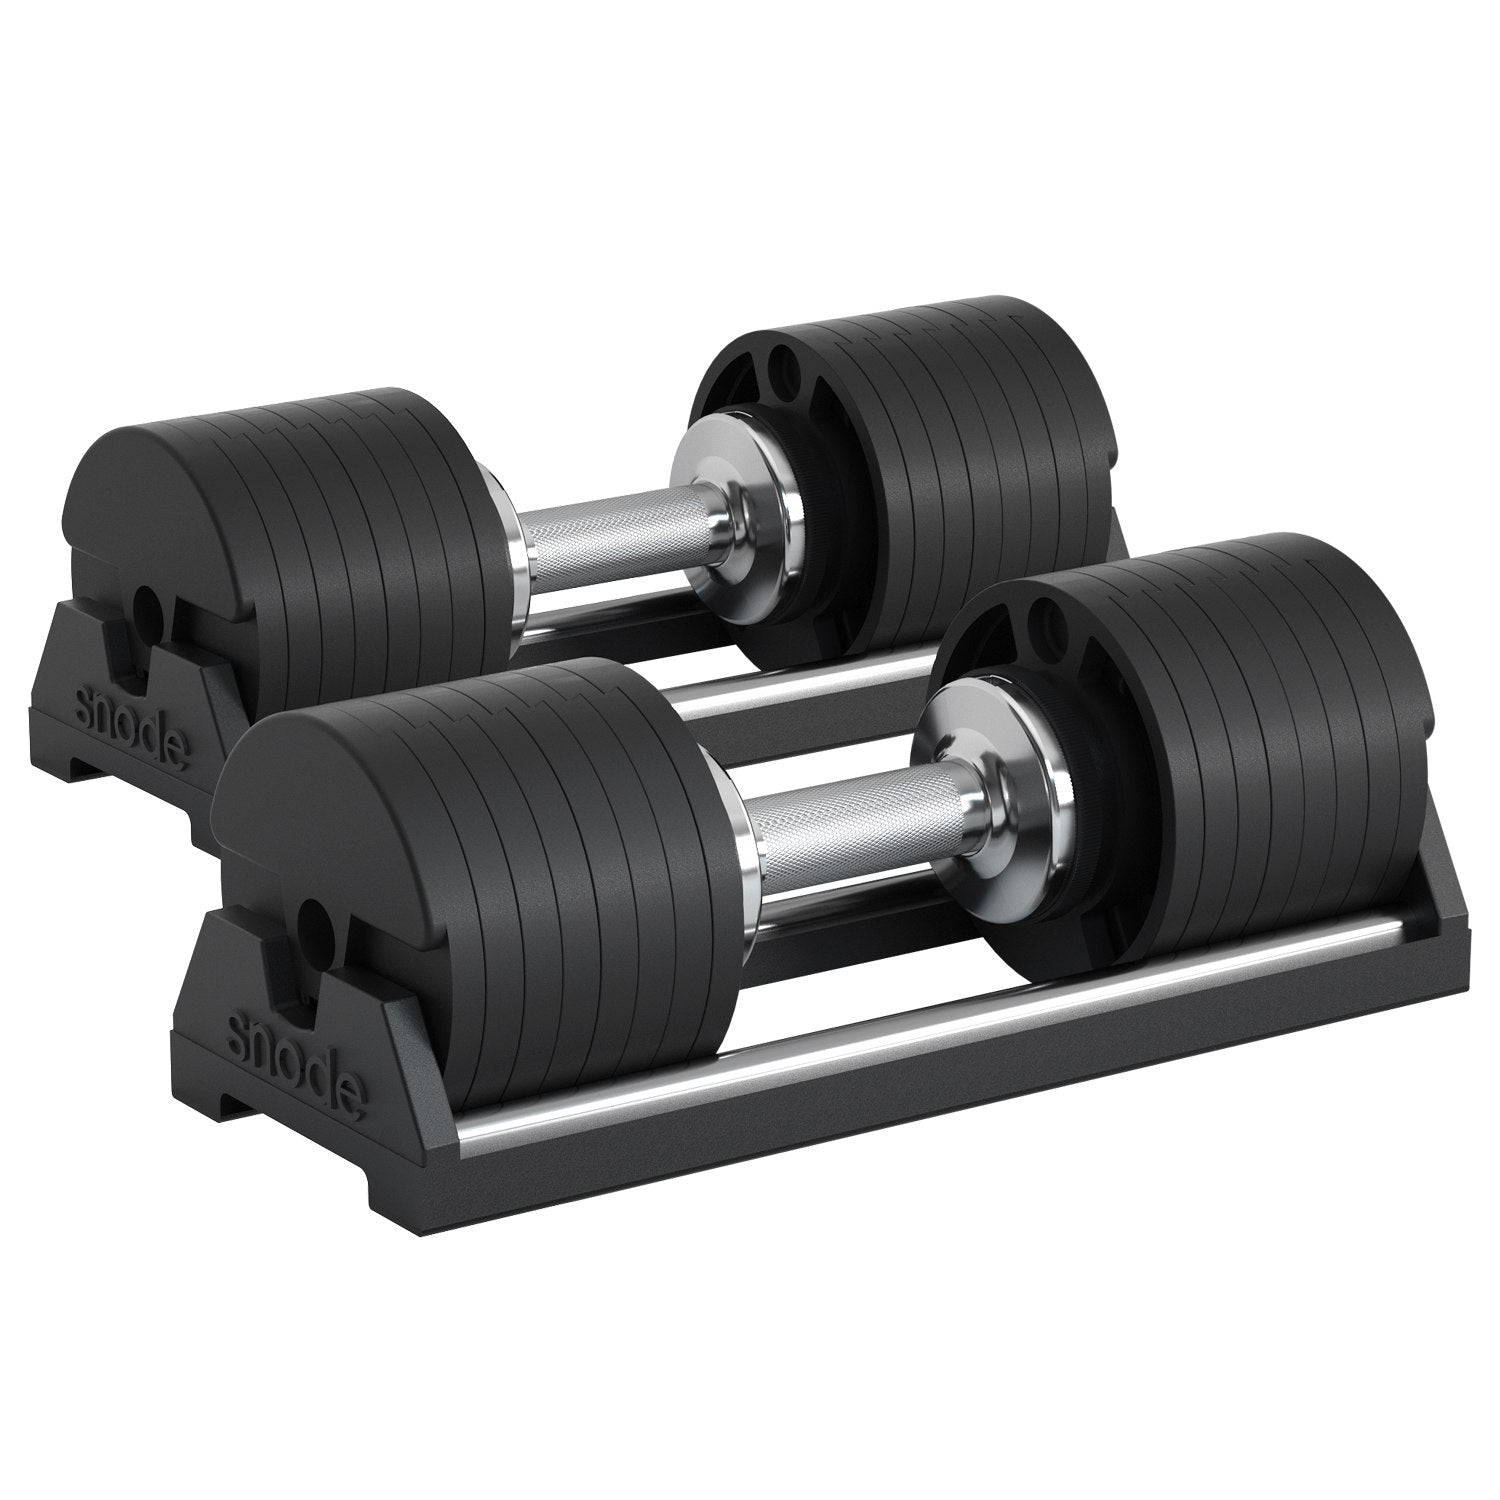 weights and dumbbells